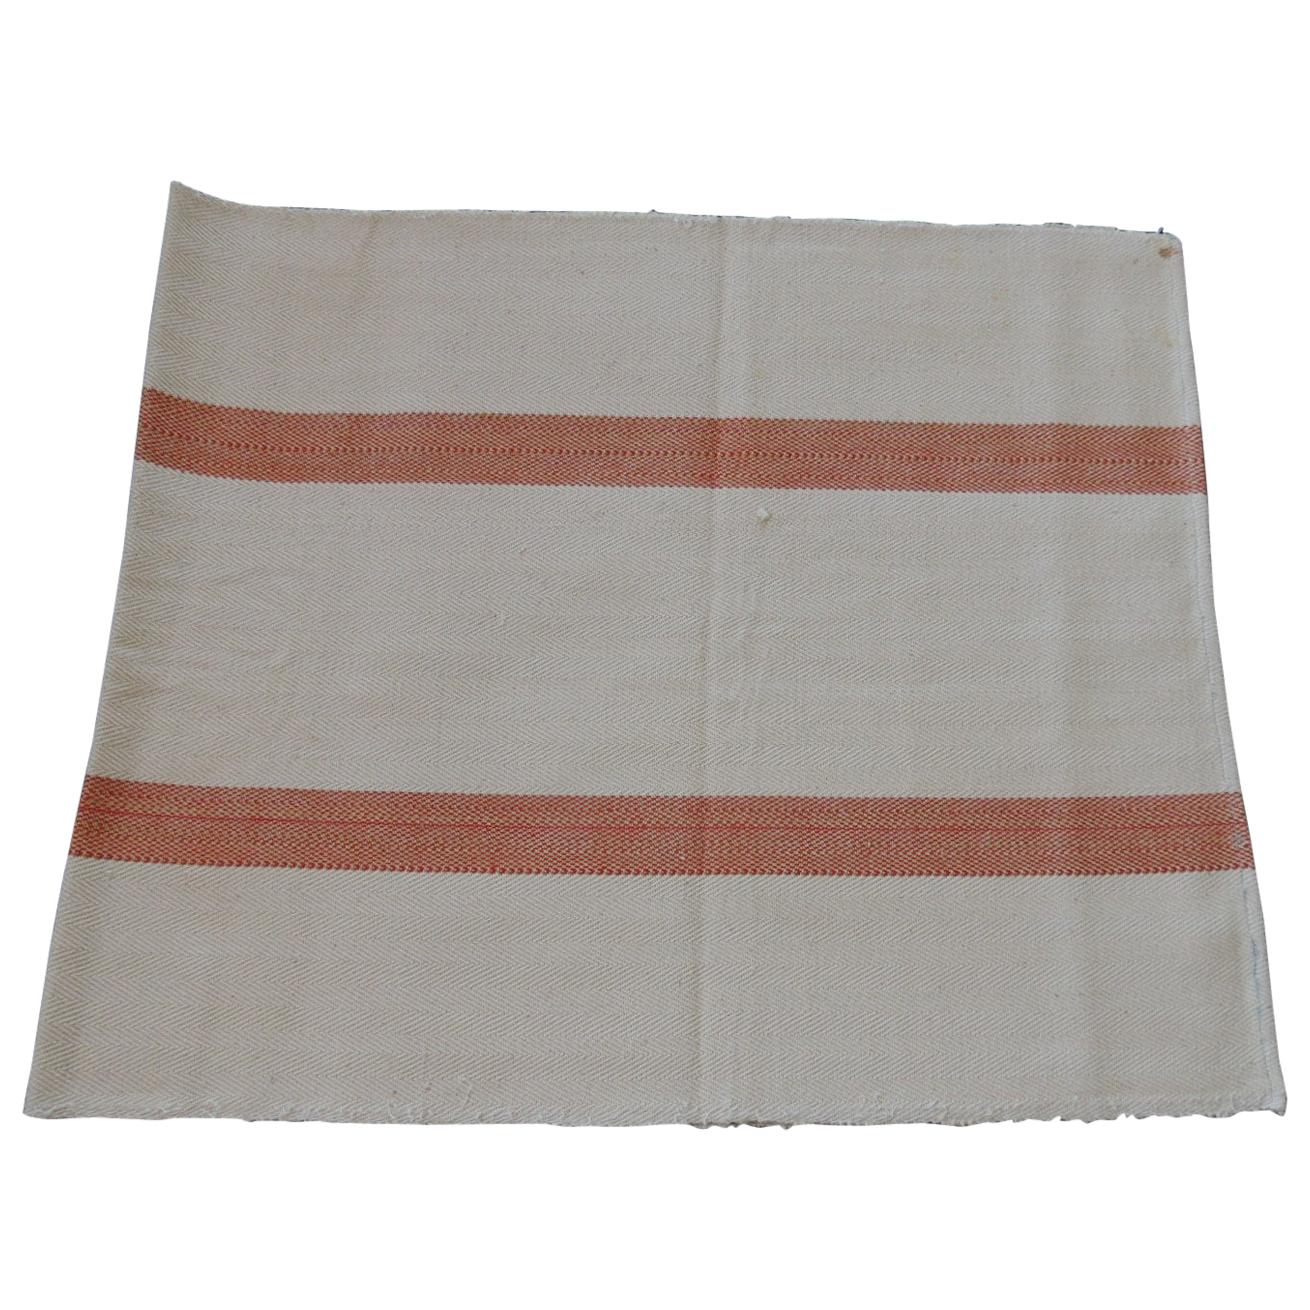 Antique French Grain Sack with Parallel Orange and Natural Stripes